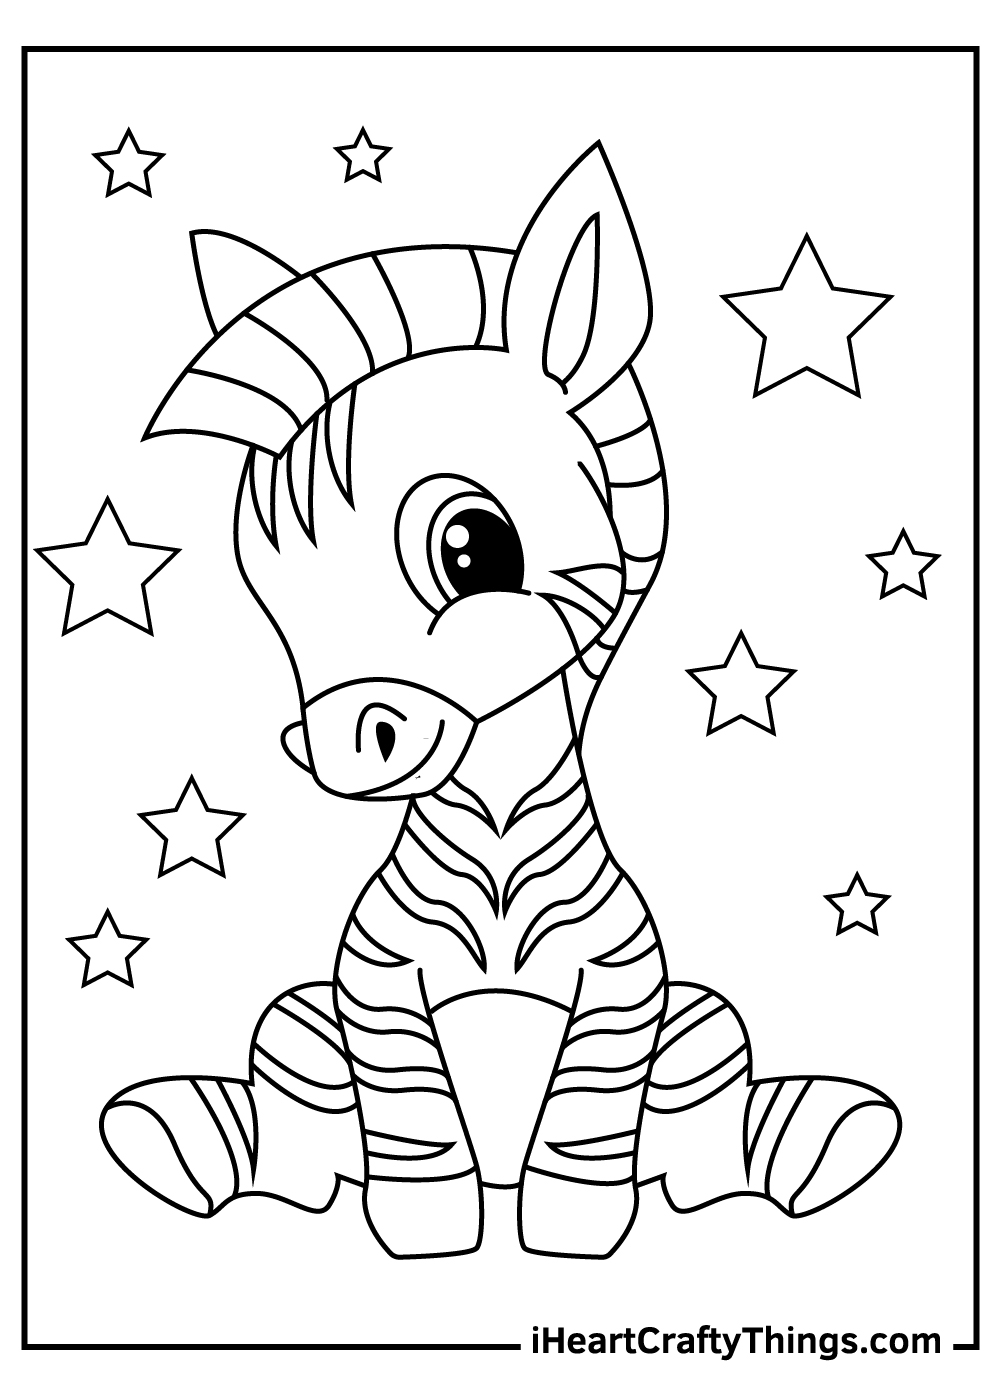 Zebra coloring pages free printables